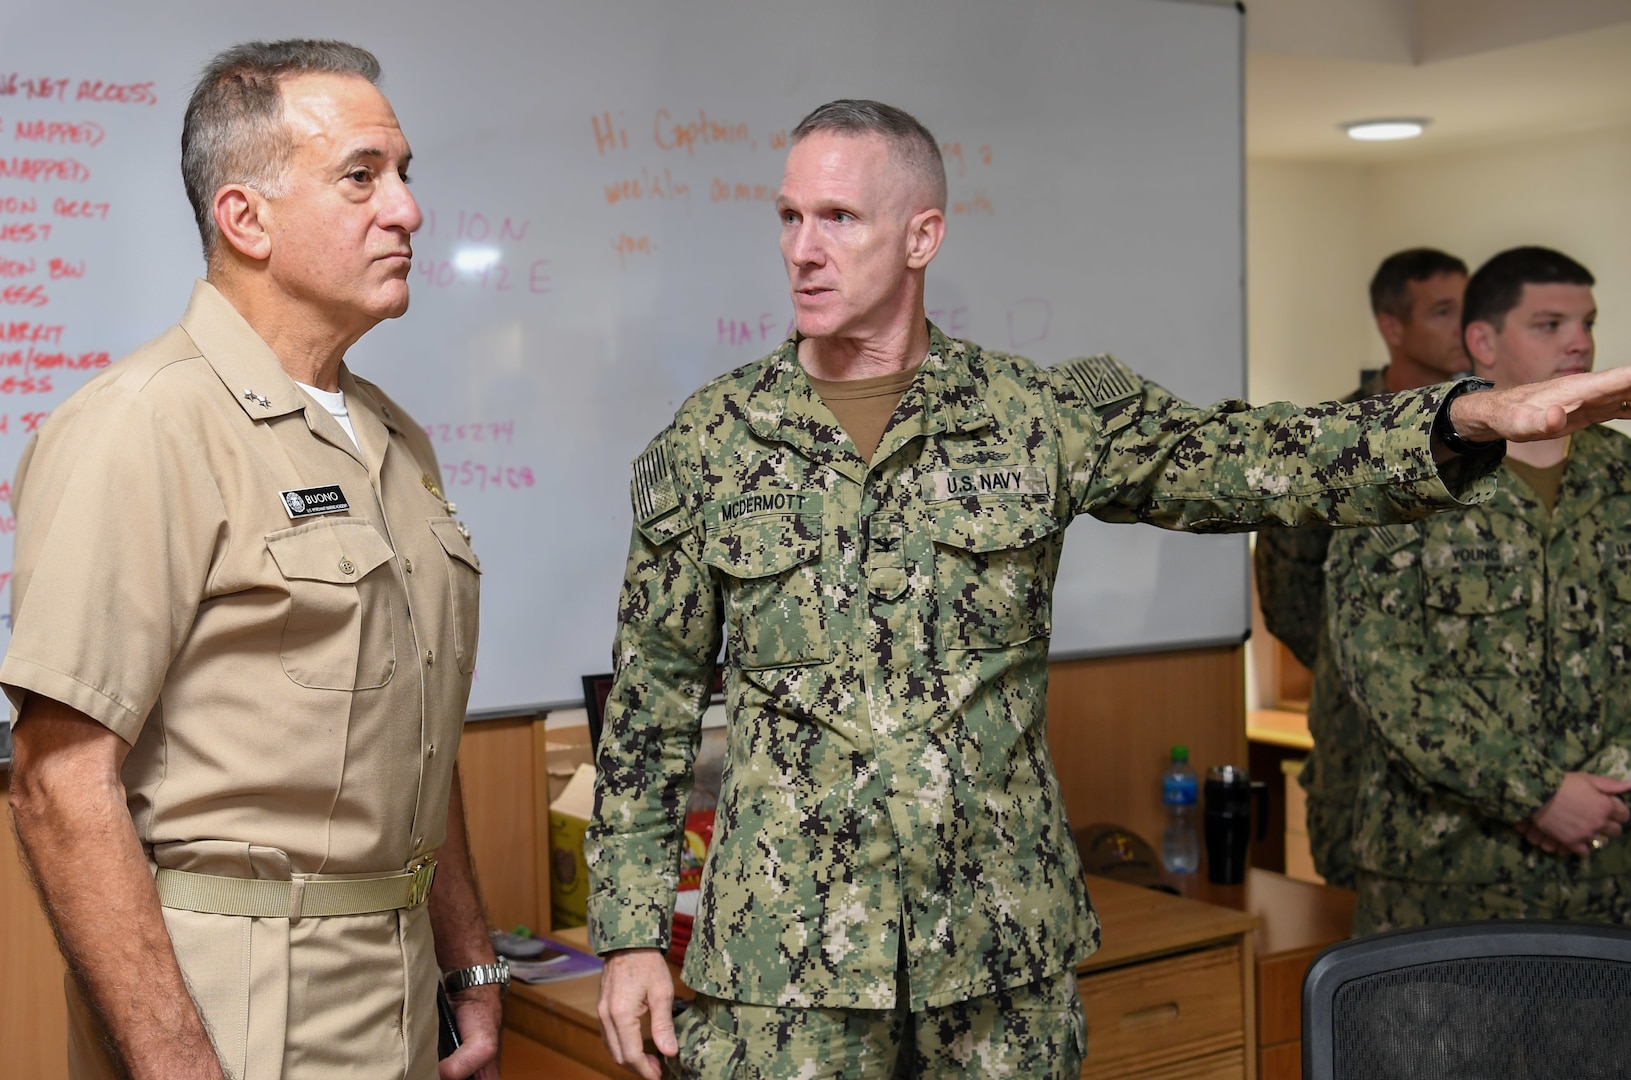 Capt. Charles McDermott, center, gives a tour of the Naval Coordination and Guidance for Shipping (NCAGS) facilities to Rear Adm. Jack Buono, the Superintendent of the U.S. Merchant Marine Academy. The U.S. Naval Forces Central Command NCAGS team has recently amplified their support to the region in support of Operation Sentinel, a multinational maritime security effort designed to increase surveillance of key waterways in the Middle East to ensure freedom of navigation. (U.S. Navy photo by Mass Communication Specialist 3rd Class Dawson Roth/Released)